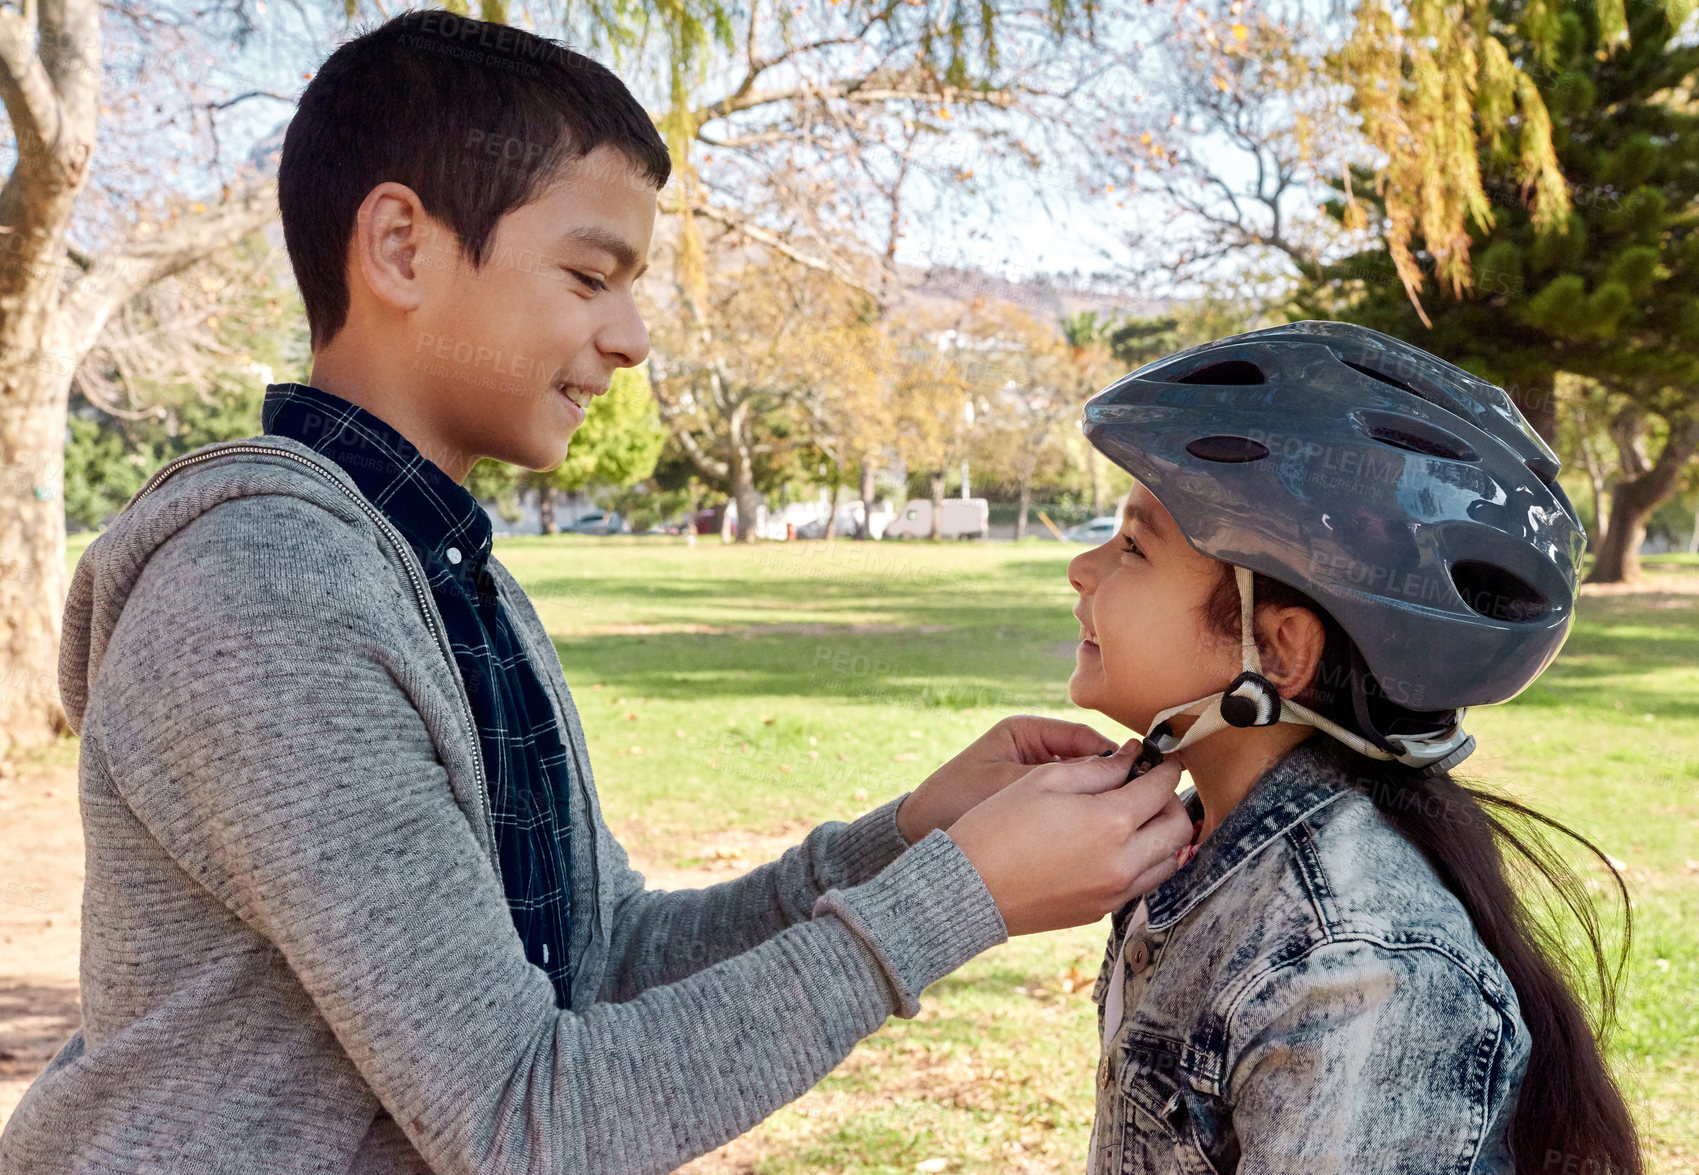 Buy stock photo Shot of a young boy helping to secure his sister’s helmet before she rides her bicycle in the park